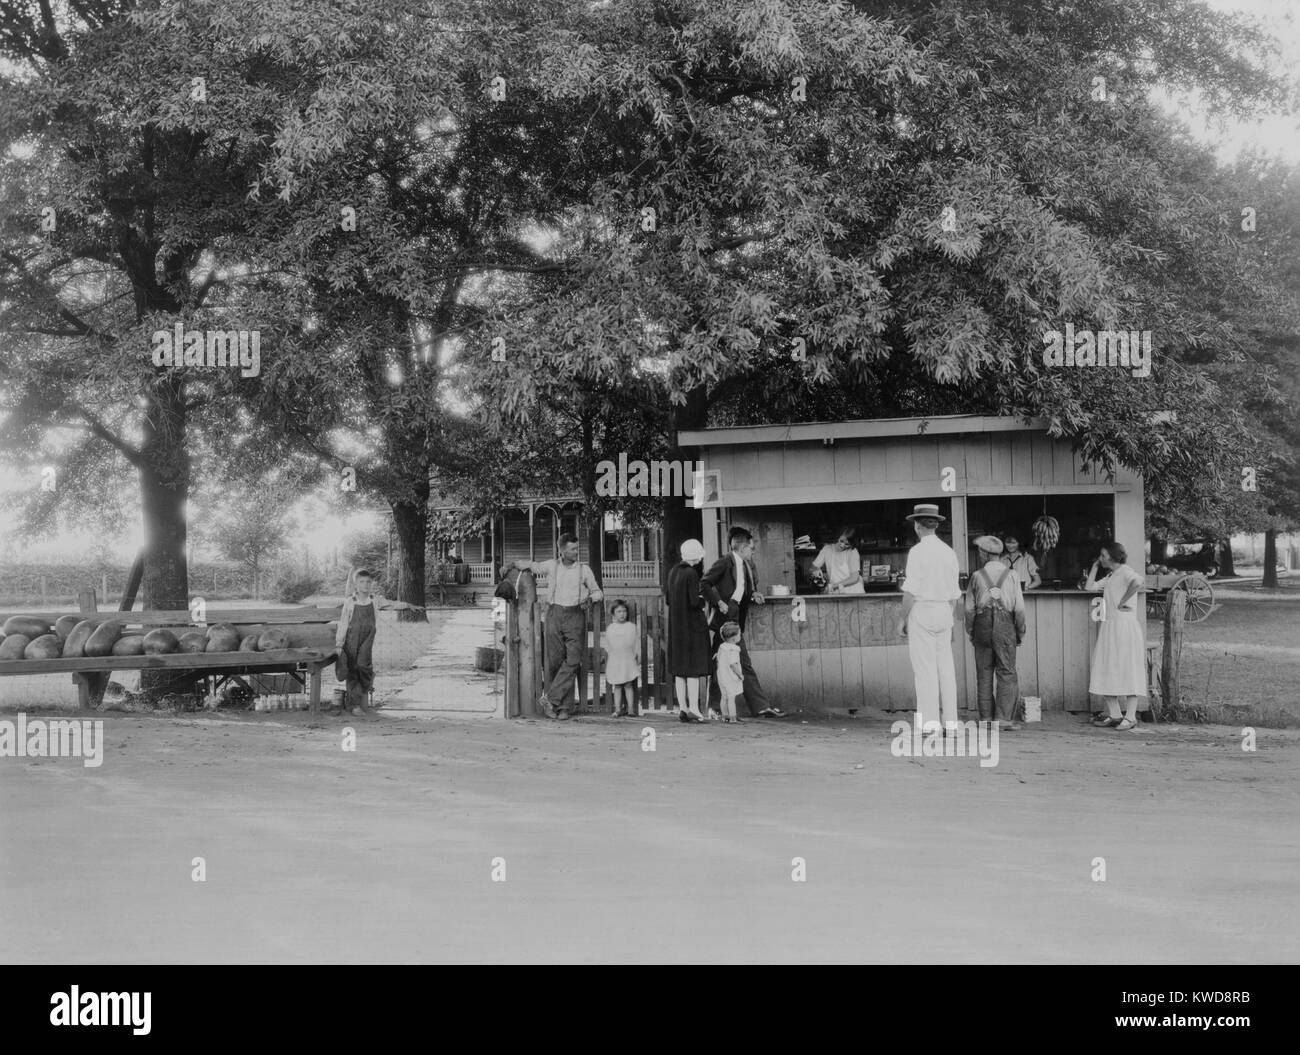 City folk in their high heels, cloche hat, suit, and neat toddler clothes at roadside food stand. 1925-30. The rural child is her barefoot, next to her father who wears heavy shoes and stained workpants (BSLOC 2016 8 110) Stock Photo